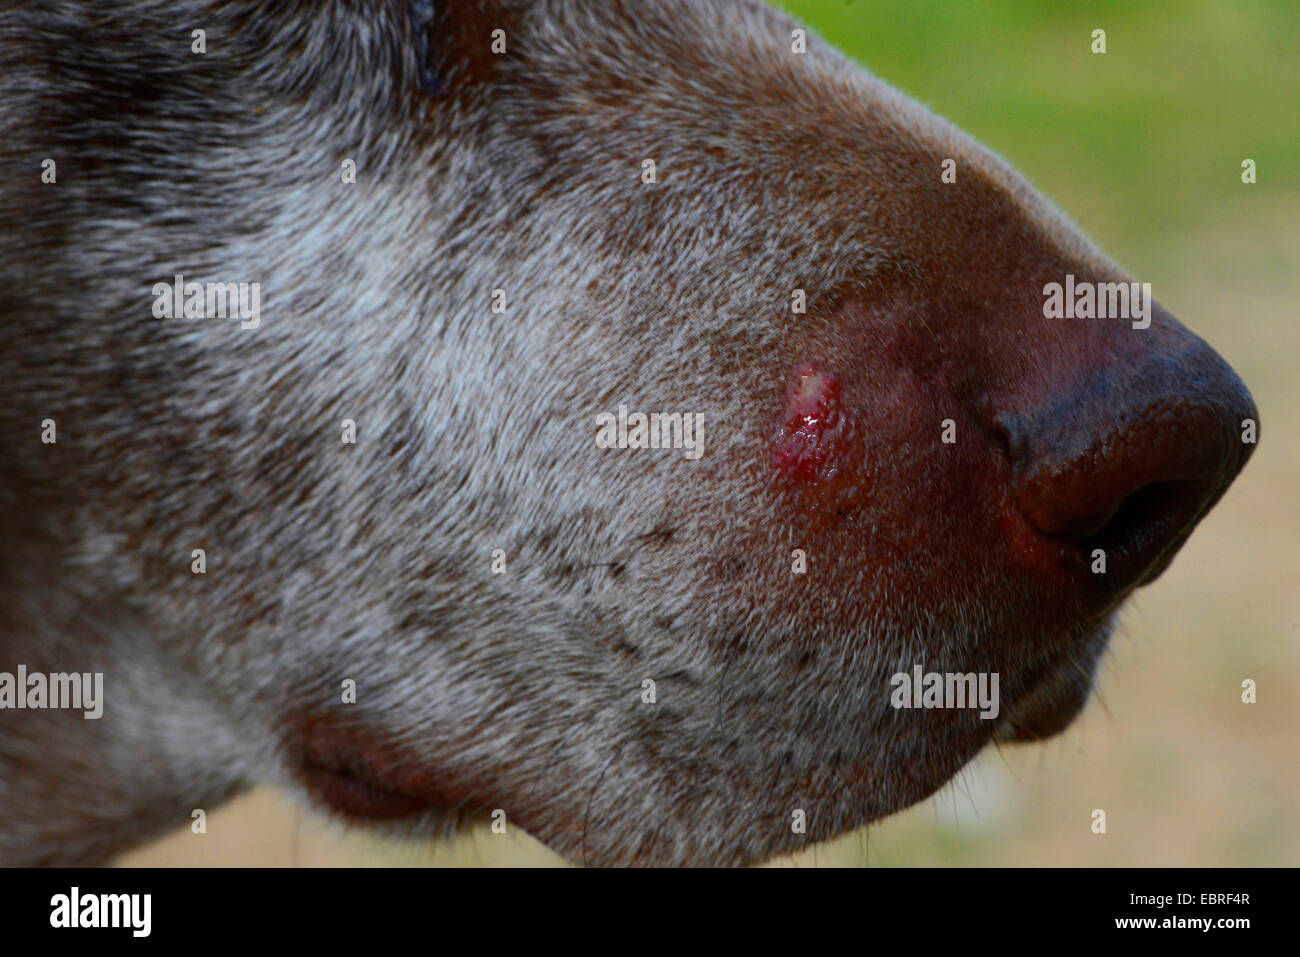 German Wire-haired Pointing Dog (Canis lupus f. familiaris), swelling after the bite of a venomous snake, Turkey, Thrace Stock Photo